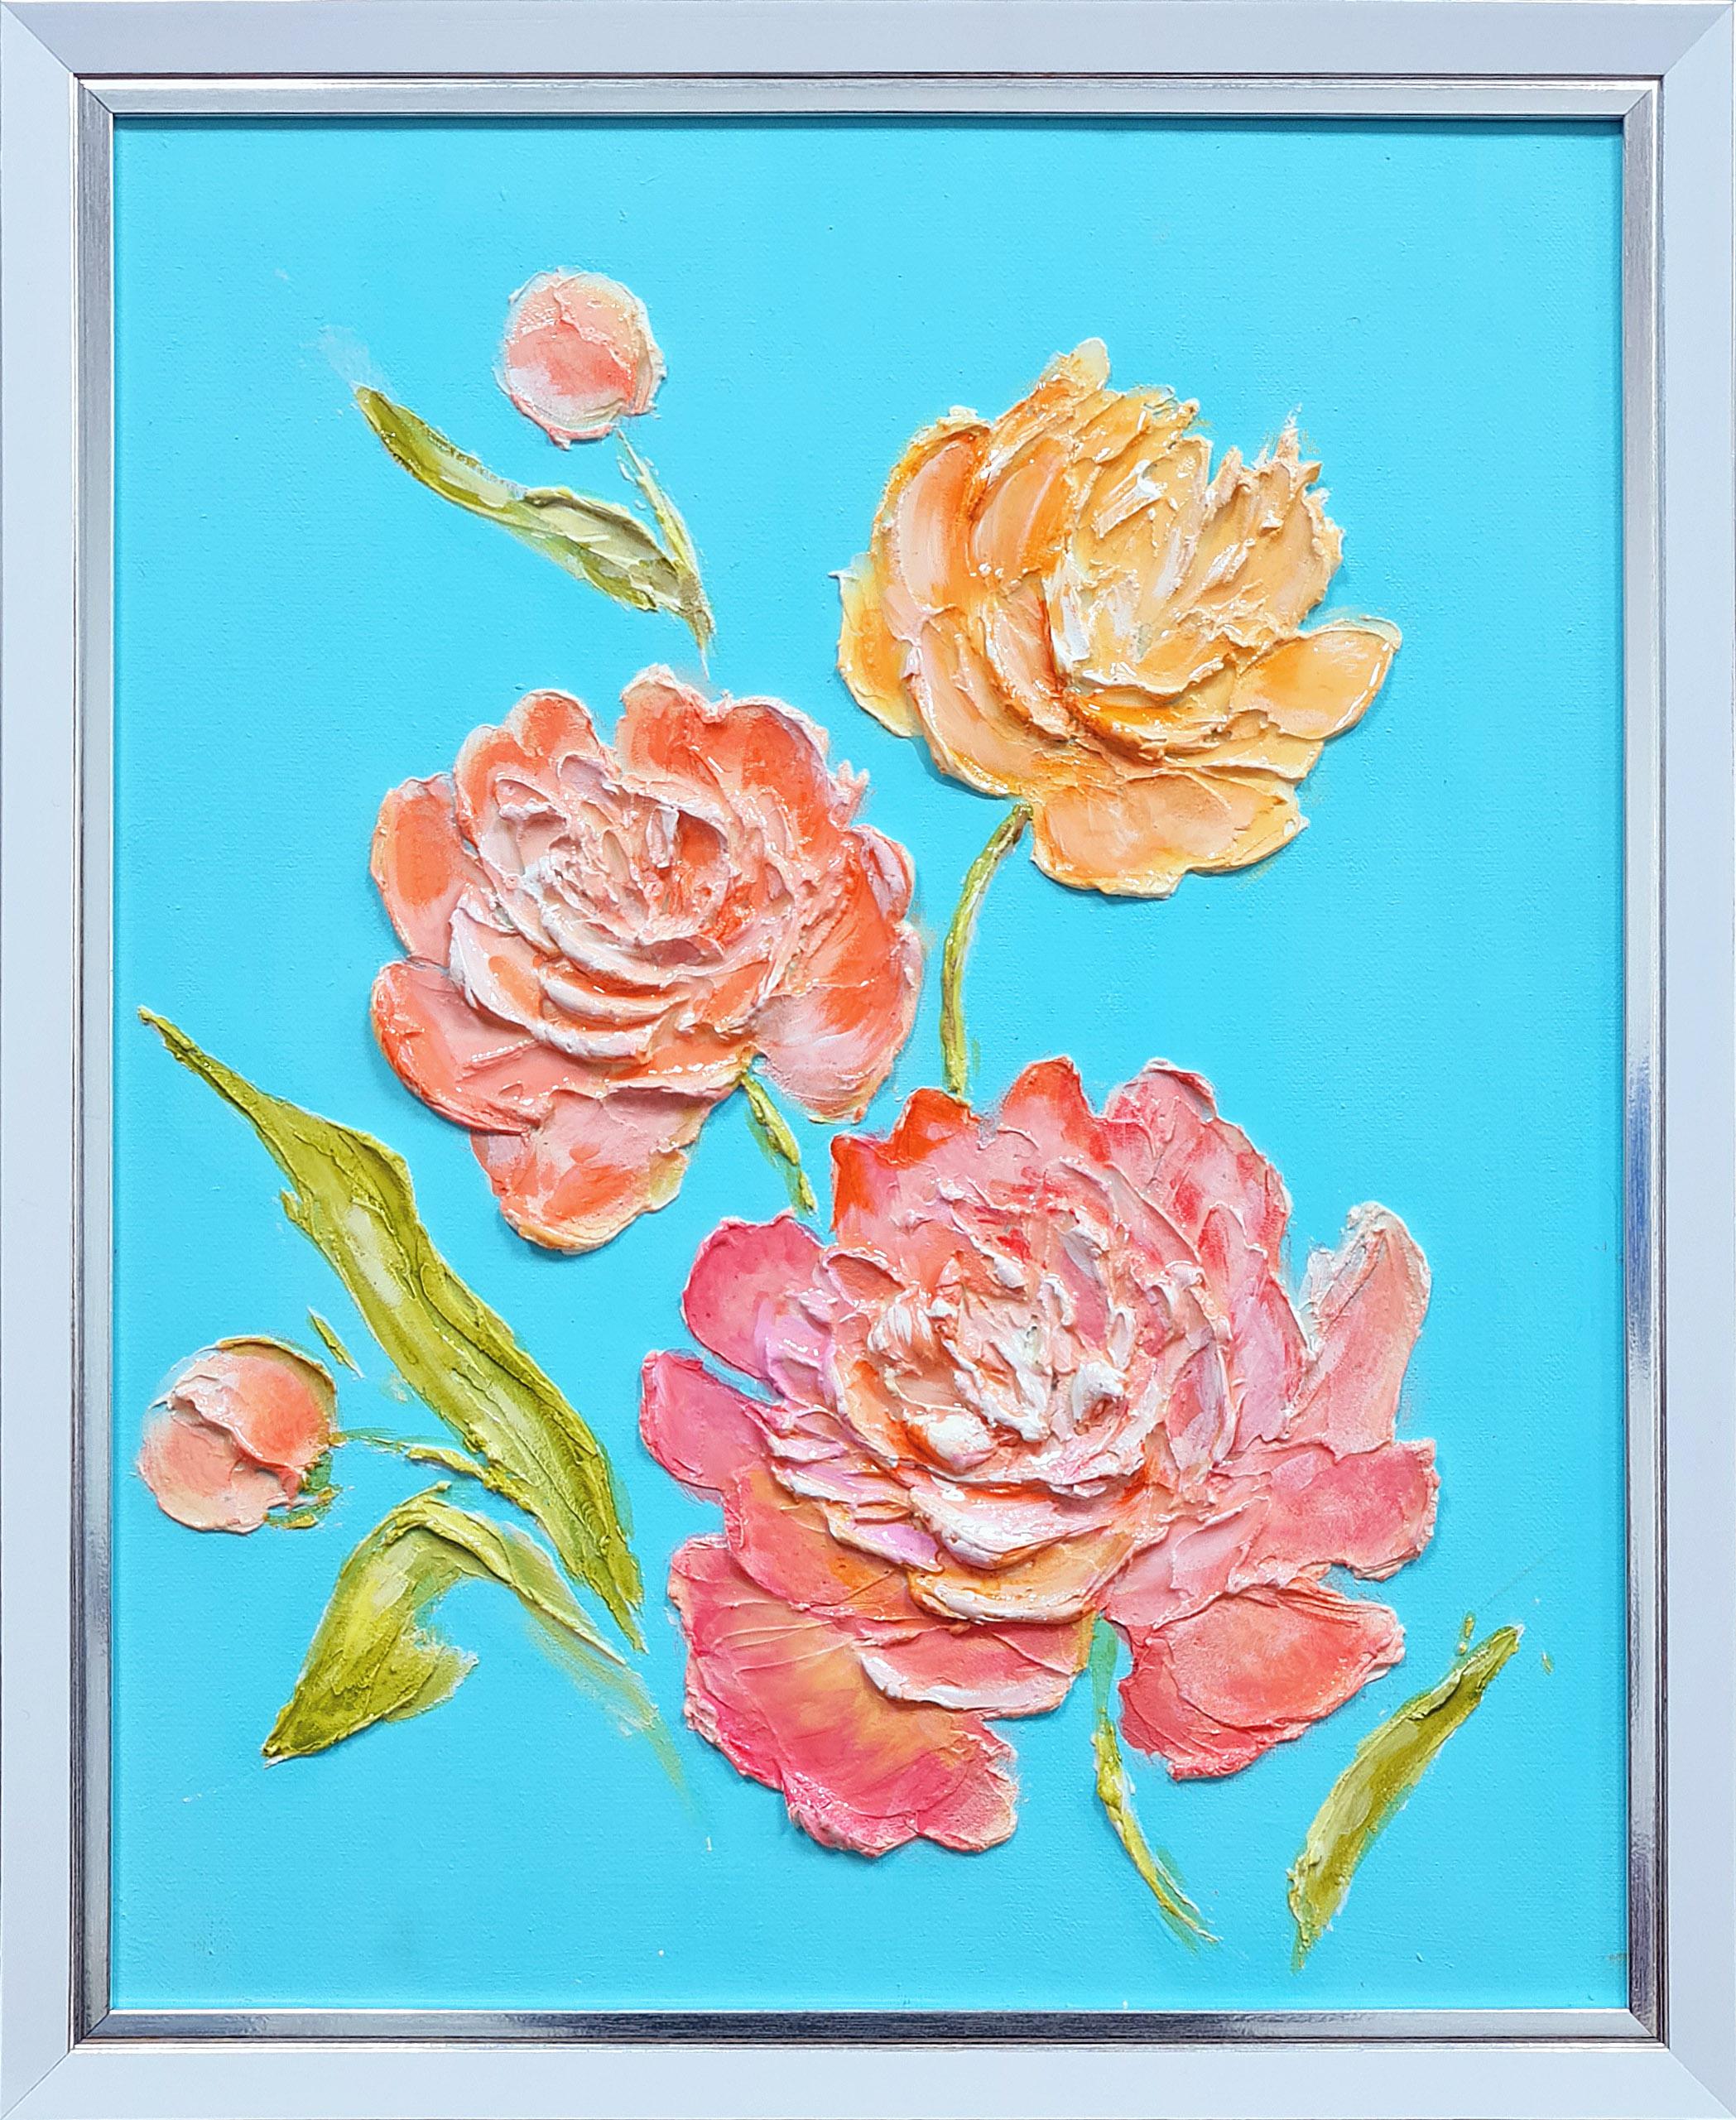 Rosy peonies on a mint background. Faith, hope, love" is an original interior te